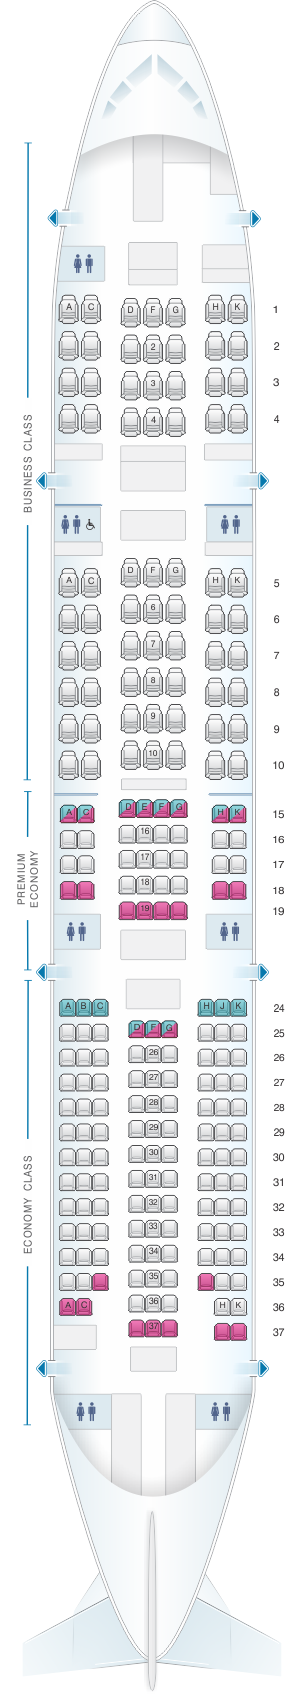 Seat map for ANA - All Nippon Airways Boeing B777 200ER 223pax